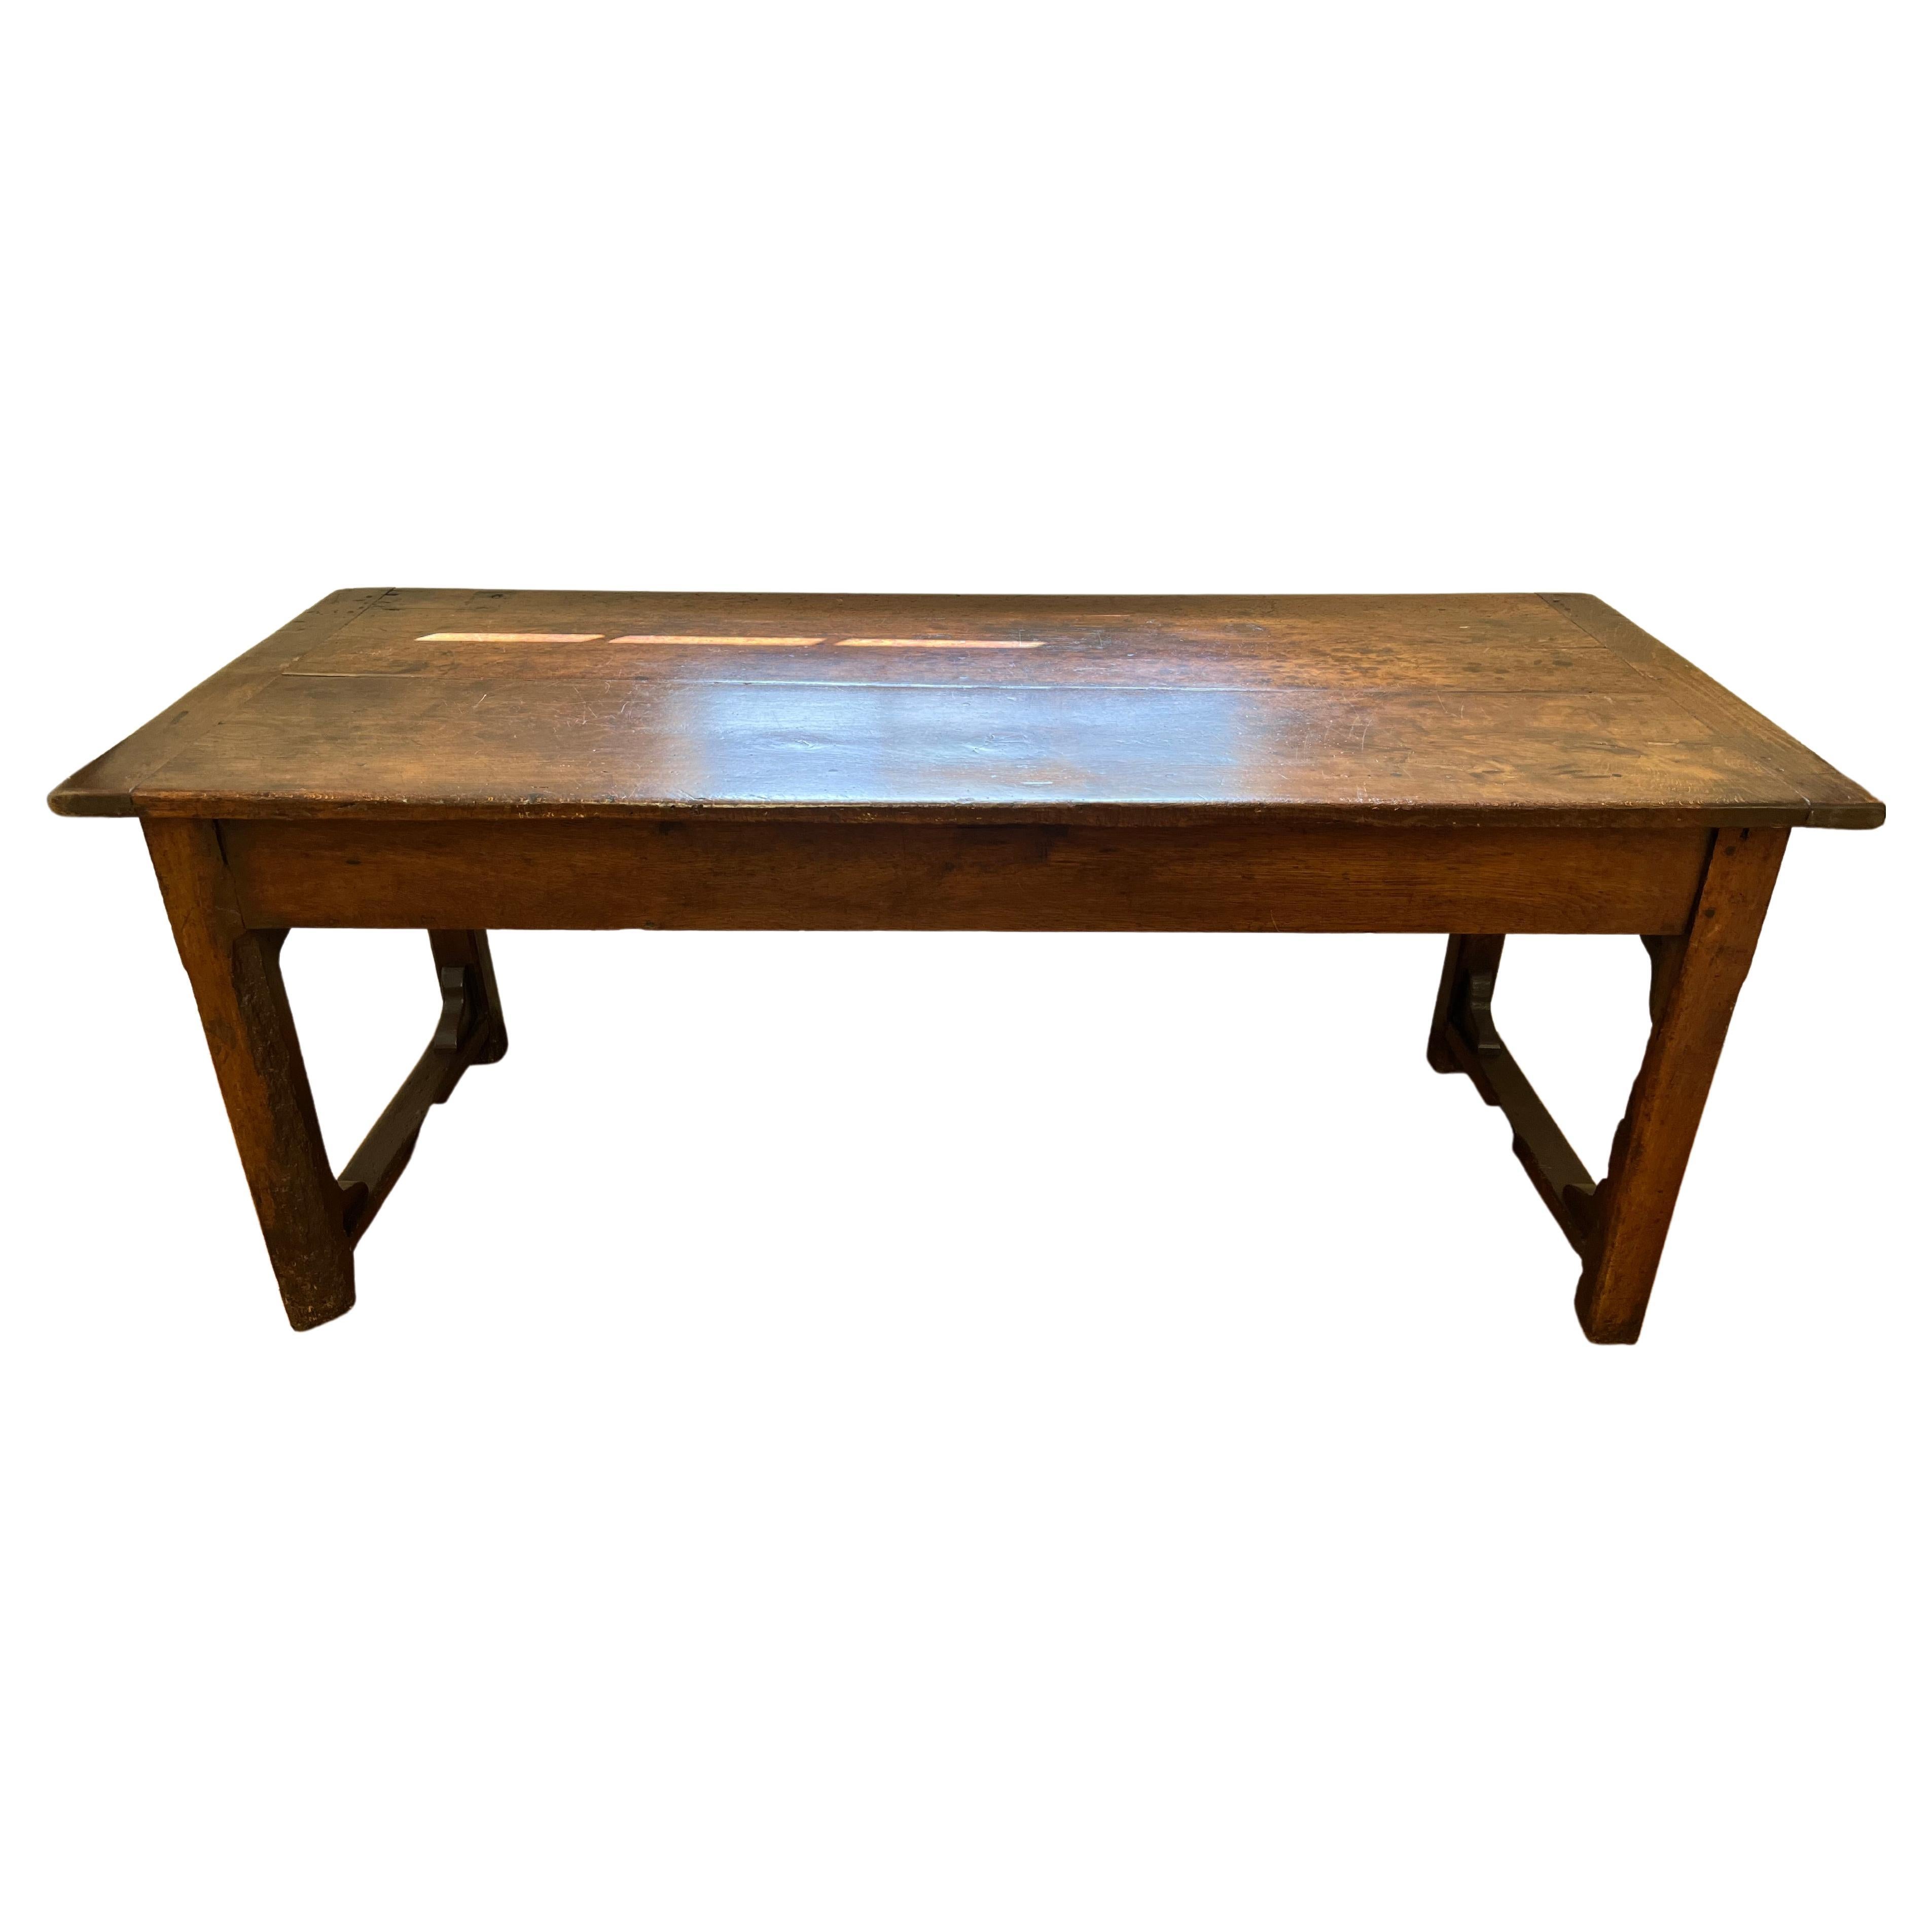 French Beech Wood Serving Table with 2 End Drawers